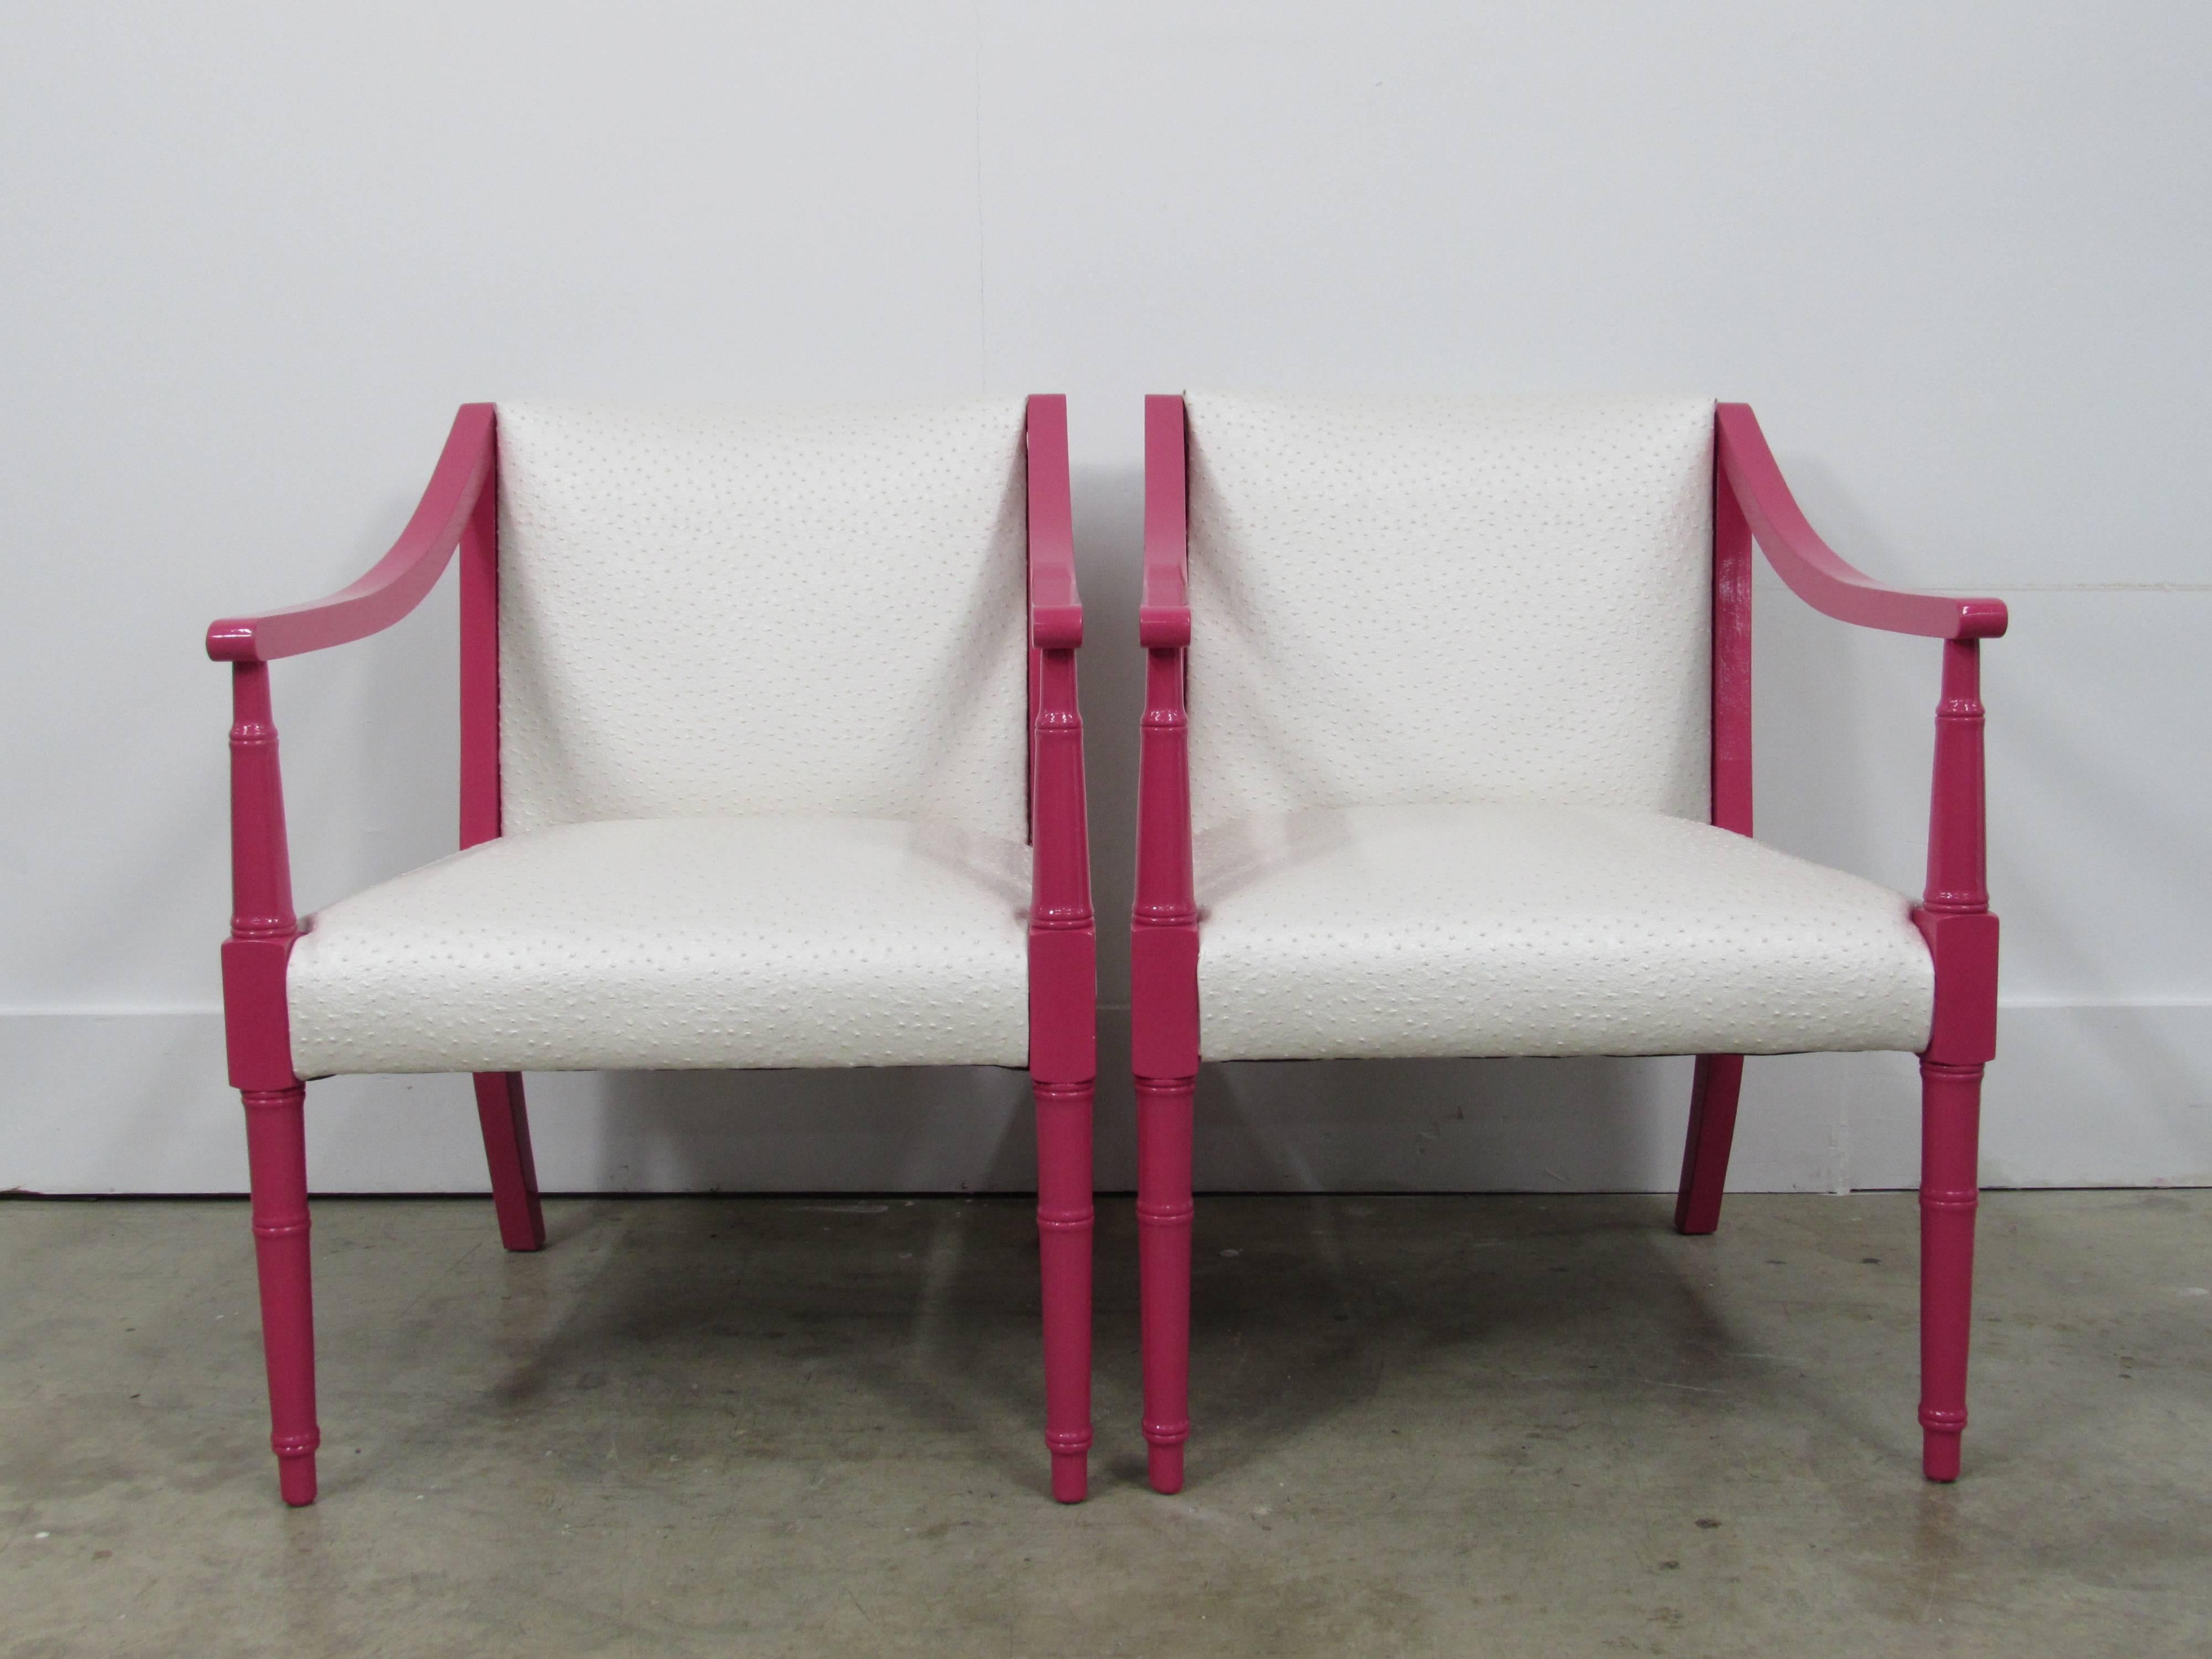 Pair of vintage walnut Club chairs with faux bamboo leg accents and professionally lacquered In-house in Benjamin Moore peony pink and newly upholstered in an ostrich embossed vinyl fabric. Measure: Seat height 16.5